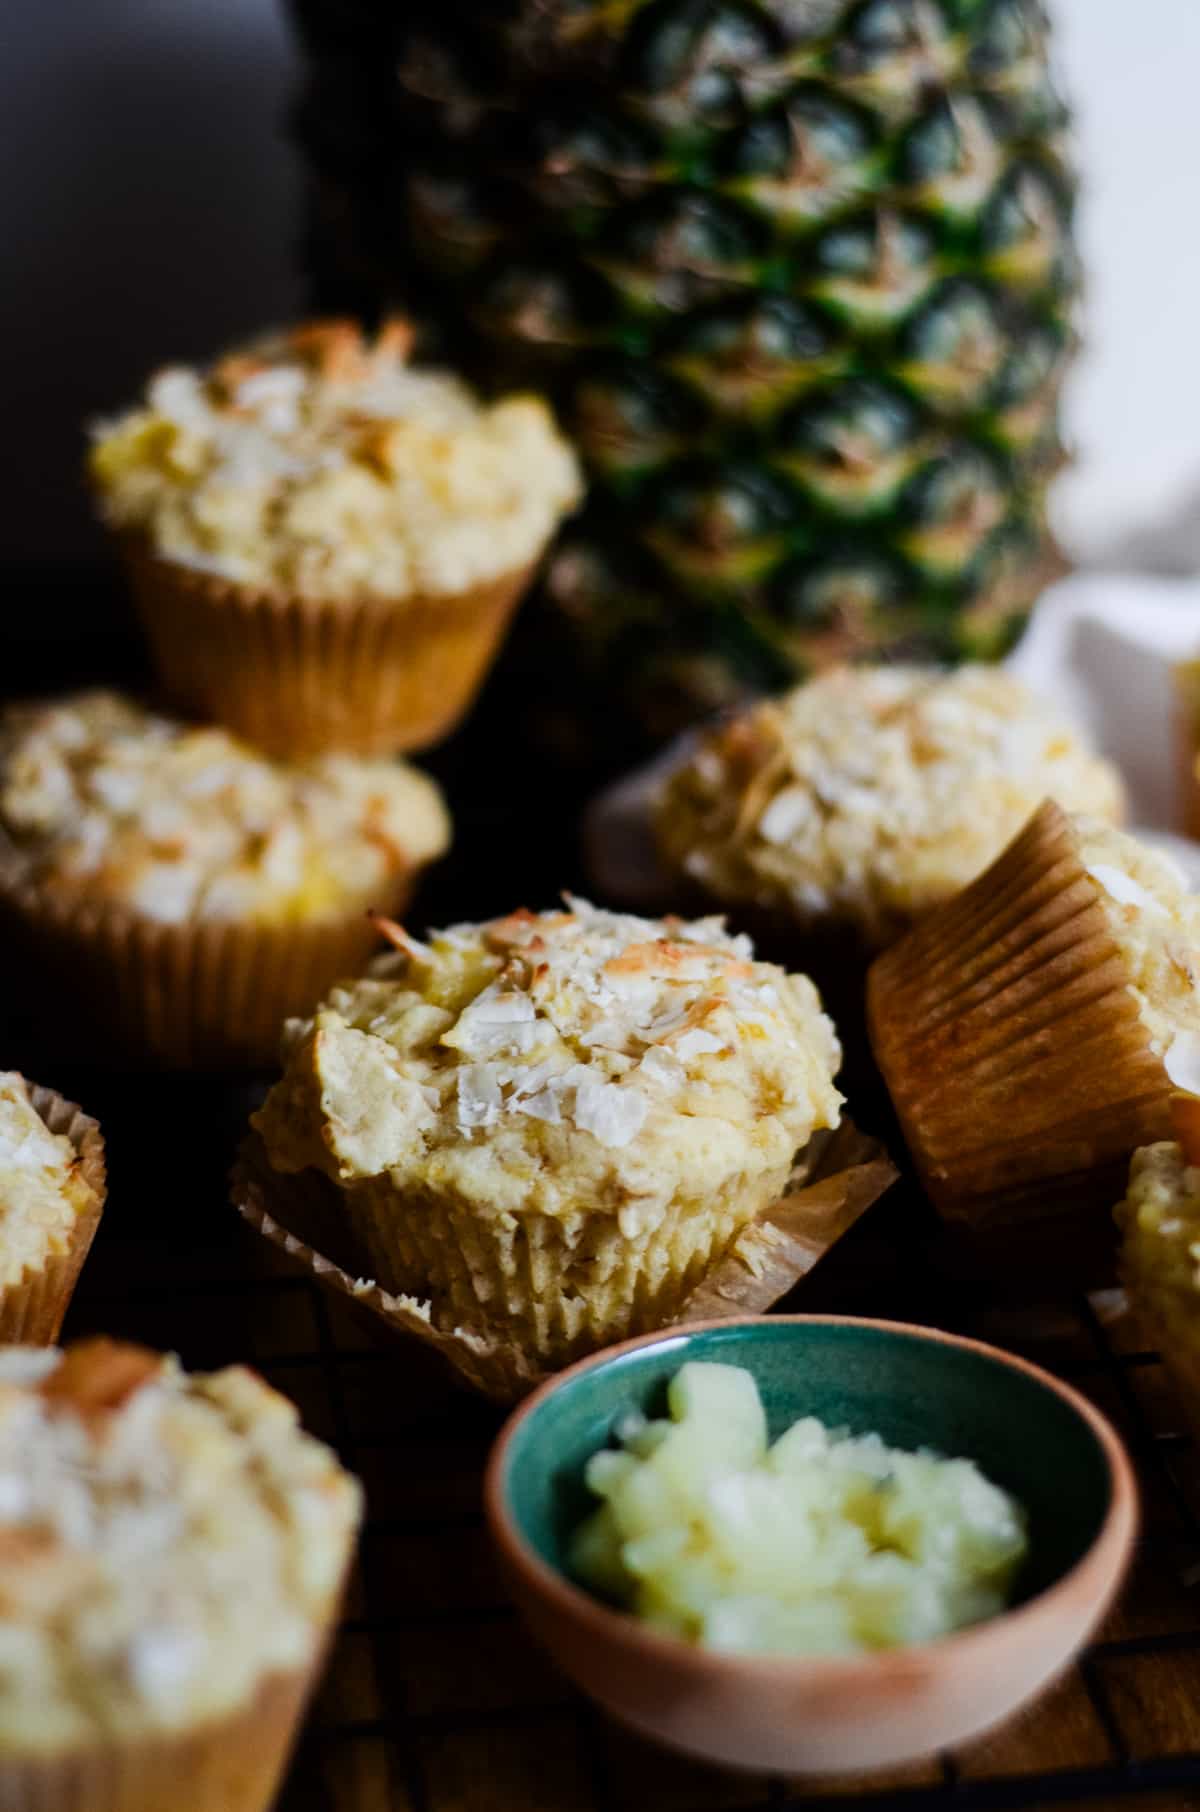 Yellow muffins with a little bowl of crushed pineapple and a whole pineapple behind the muffins.